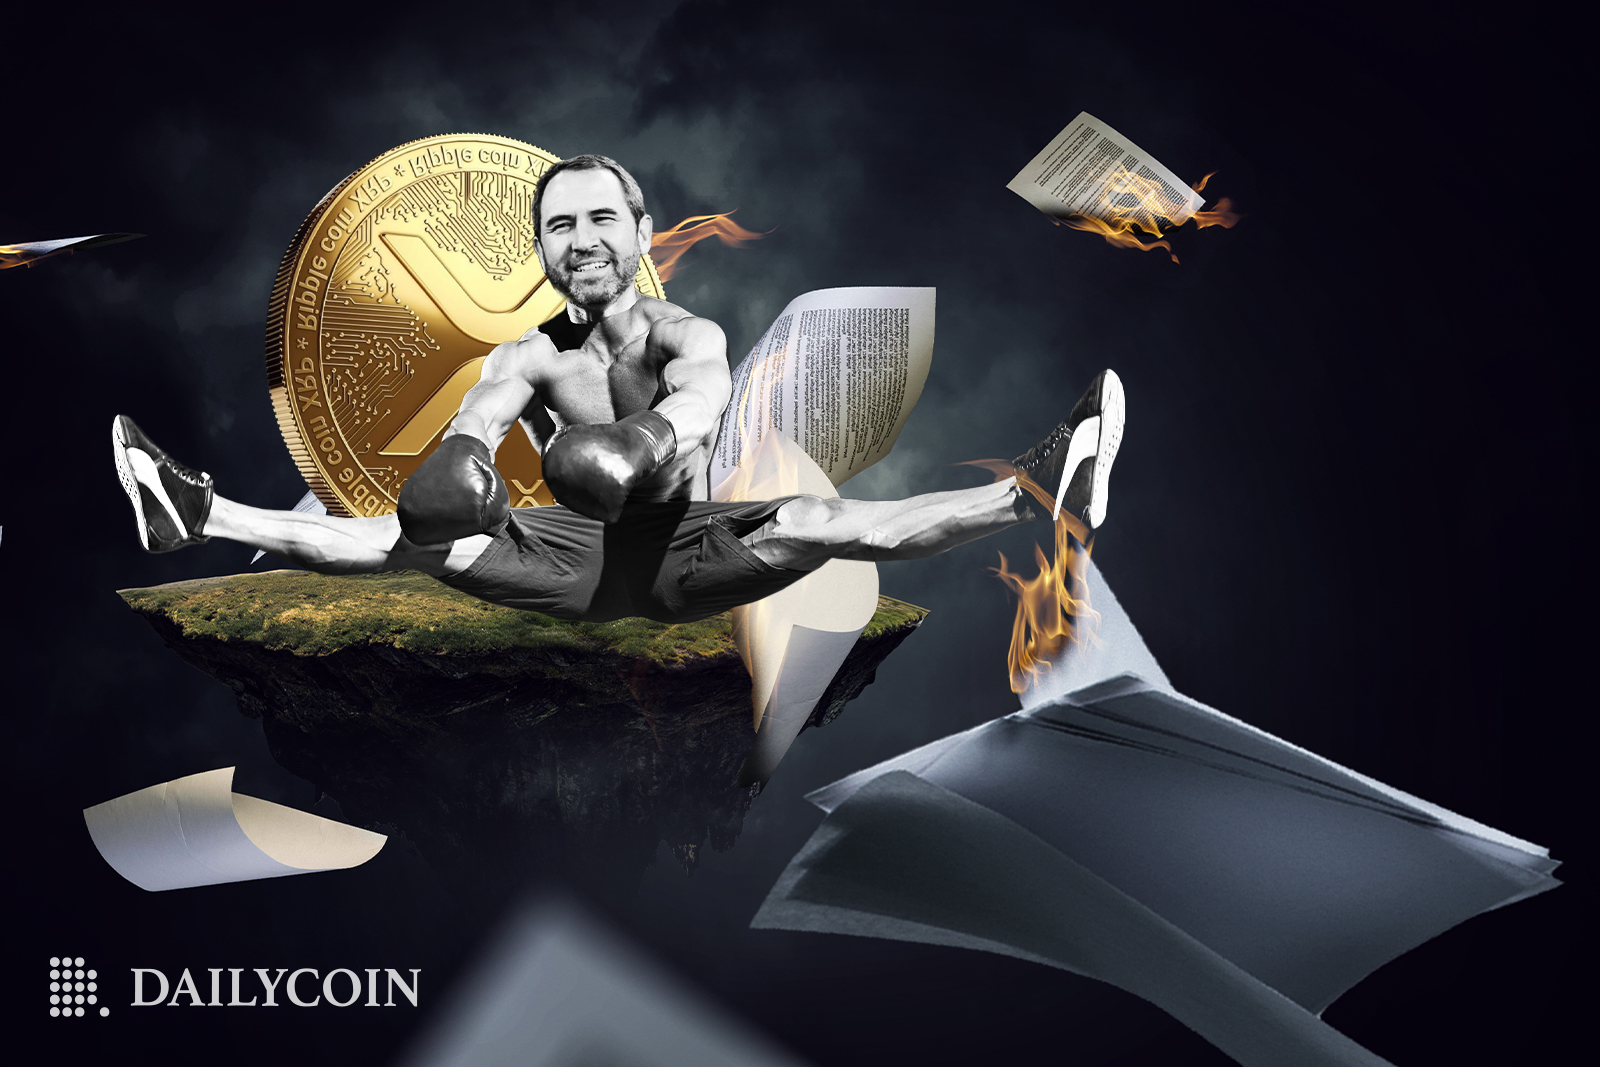 Brad Garlinghouse jumping up in the air while documents flying around in front of a giant XRP token on a floating island.